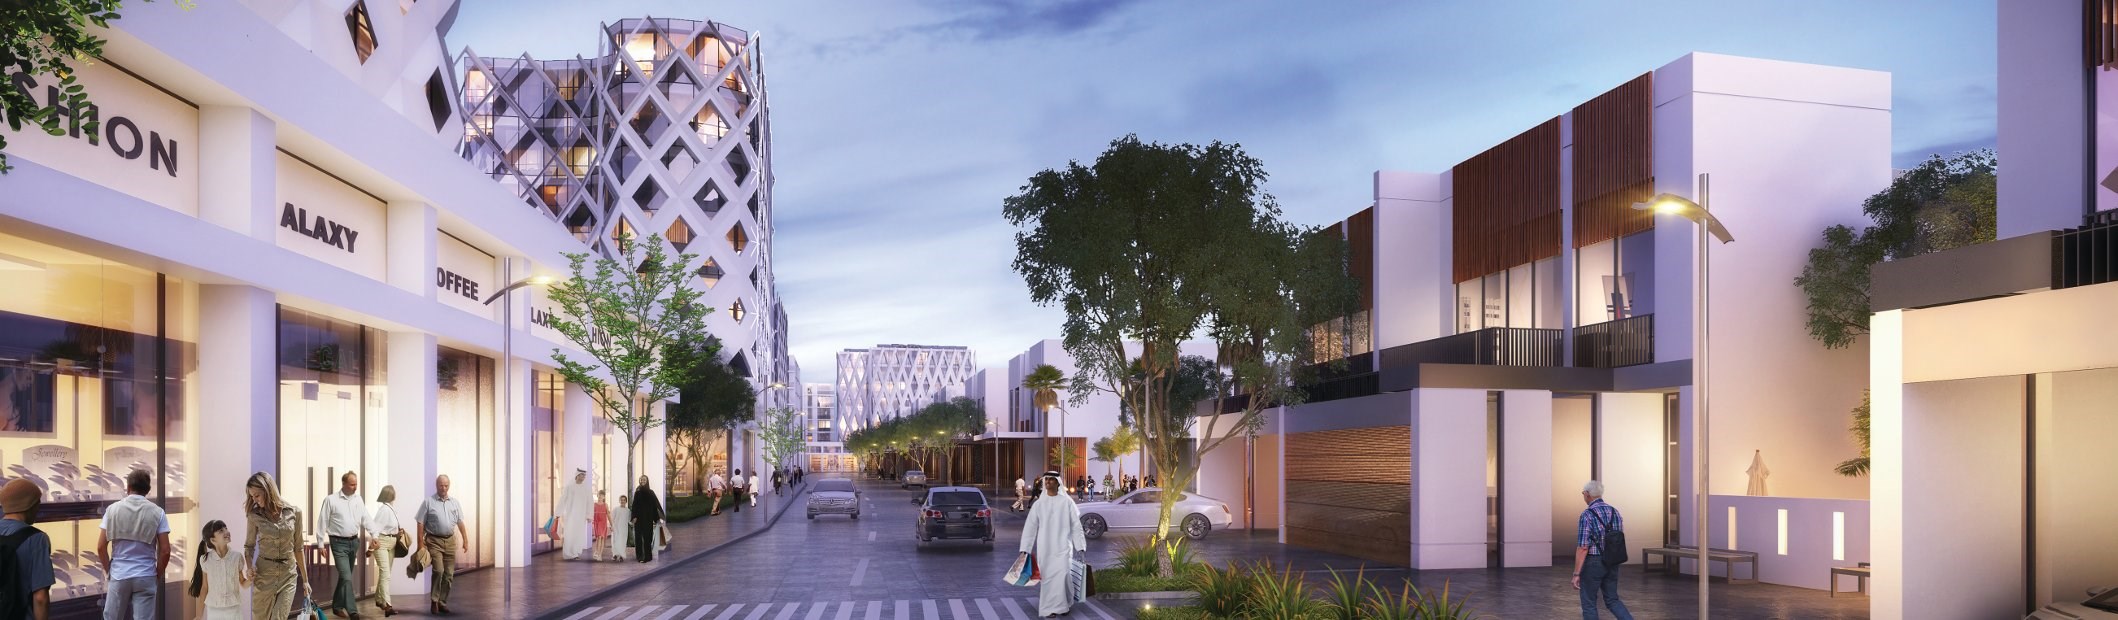 Arada secures AED1 billion financing to help develop Sharjah’s largest mixed-use project, Aljada